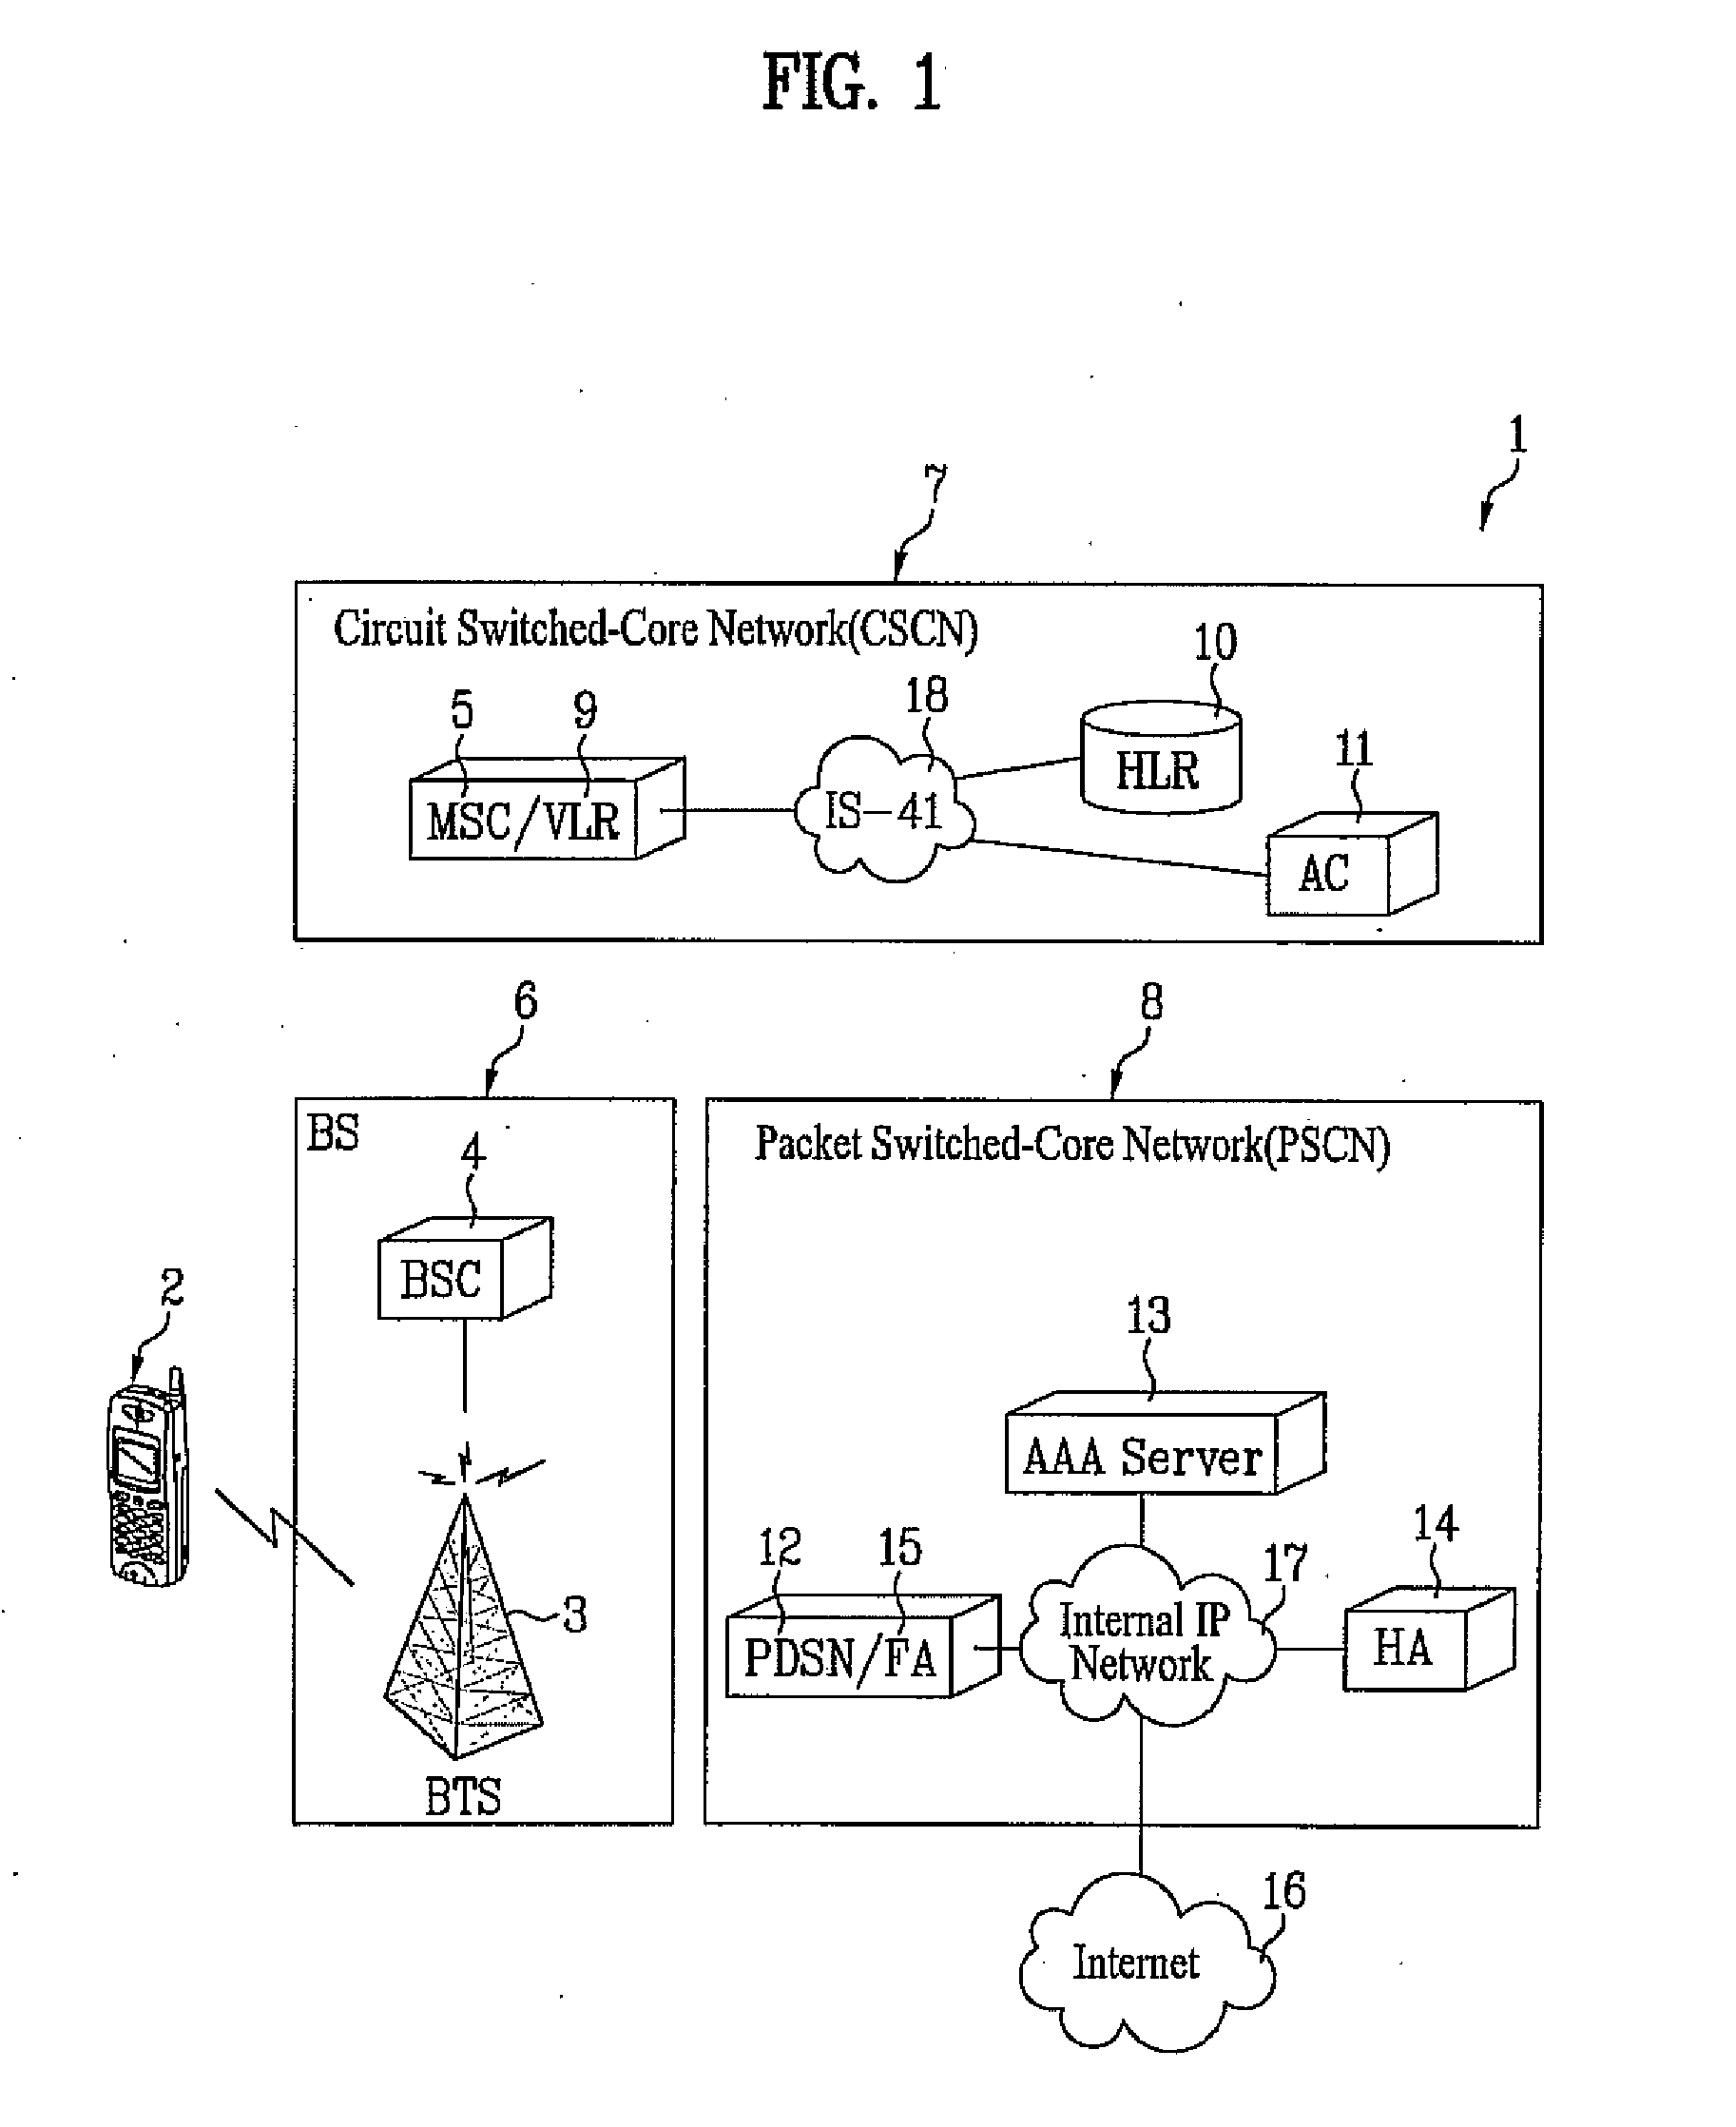 Method of transmitting data in cellular networks using cooperative relaying